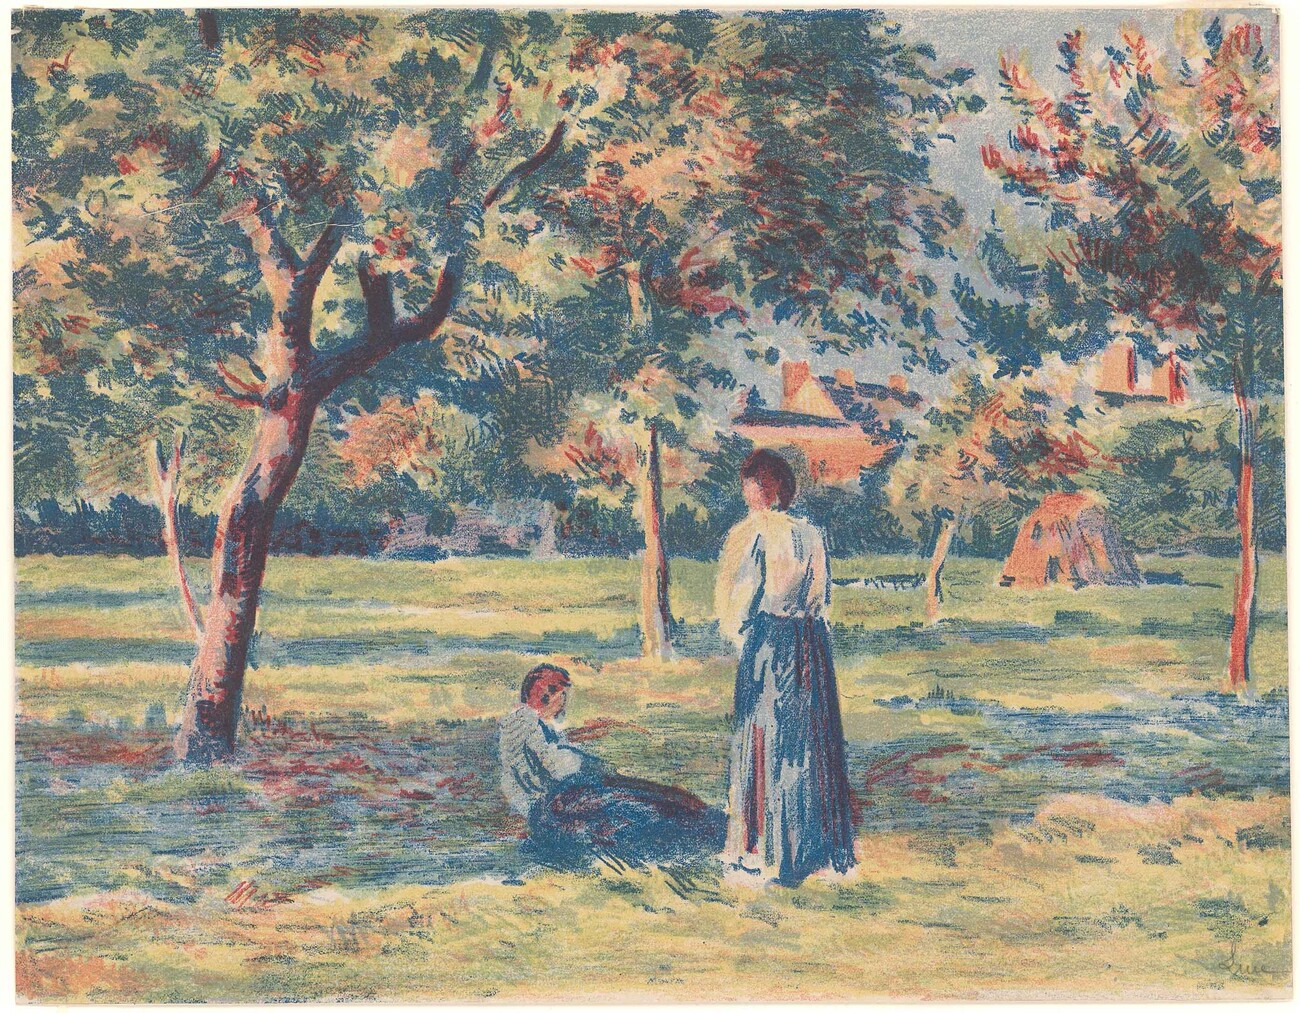 Two figures one sitting and other standing outdoors amongst trees